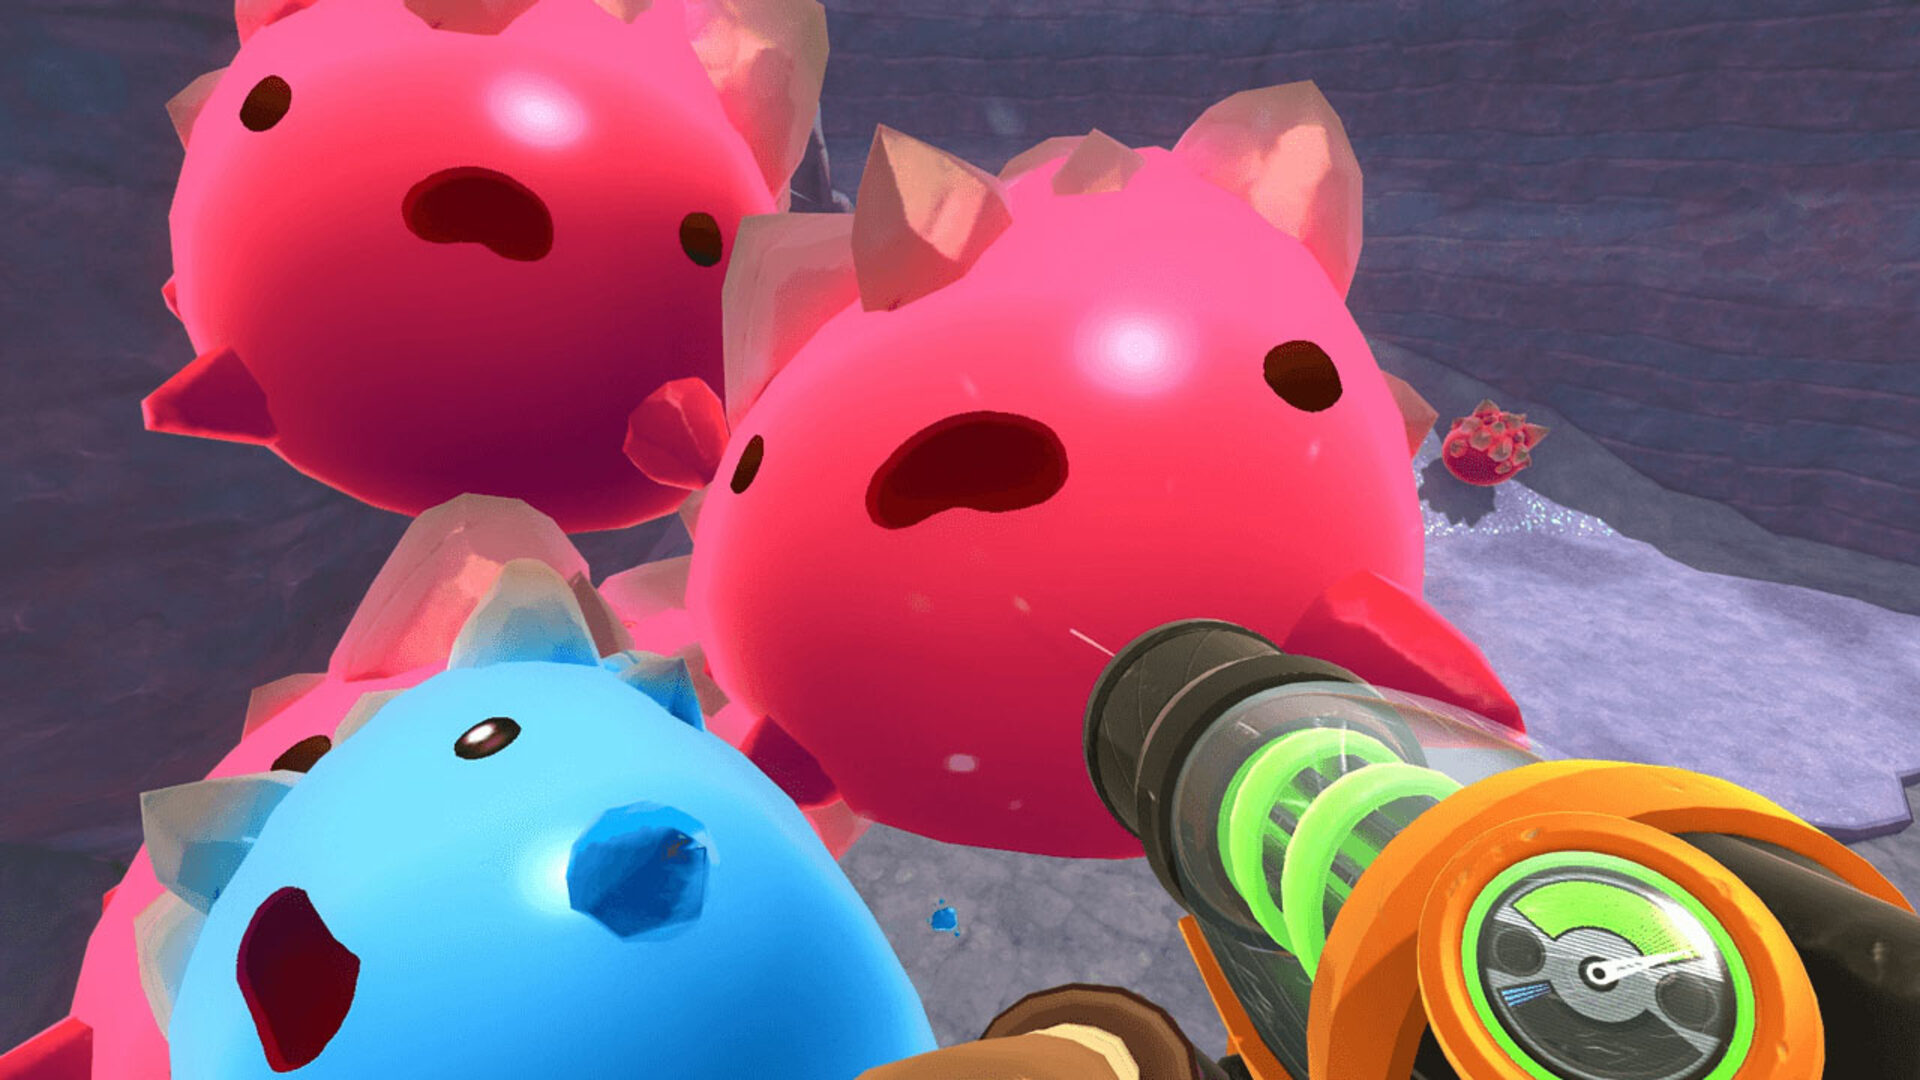 Buy cheap Slime Rancher 2 cd key - lowest price